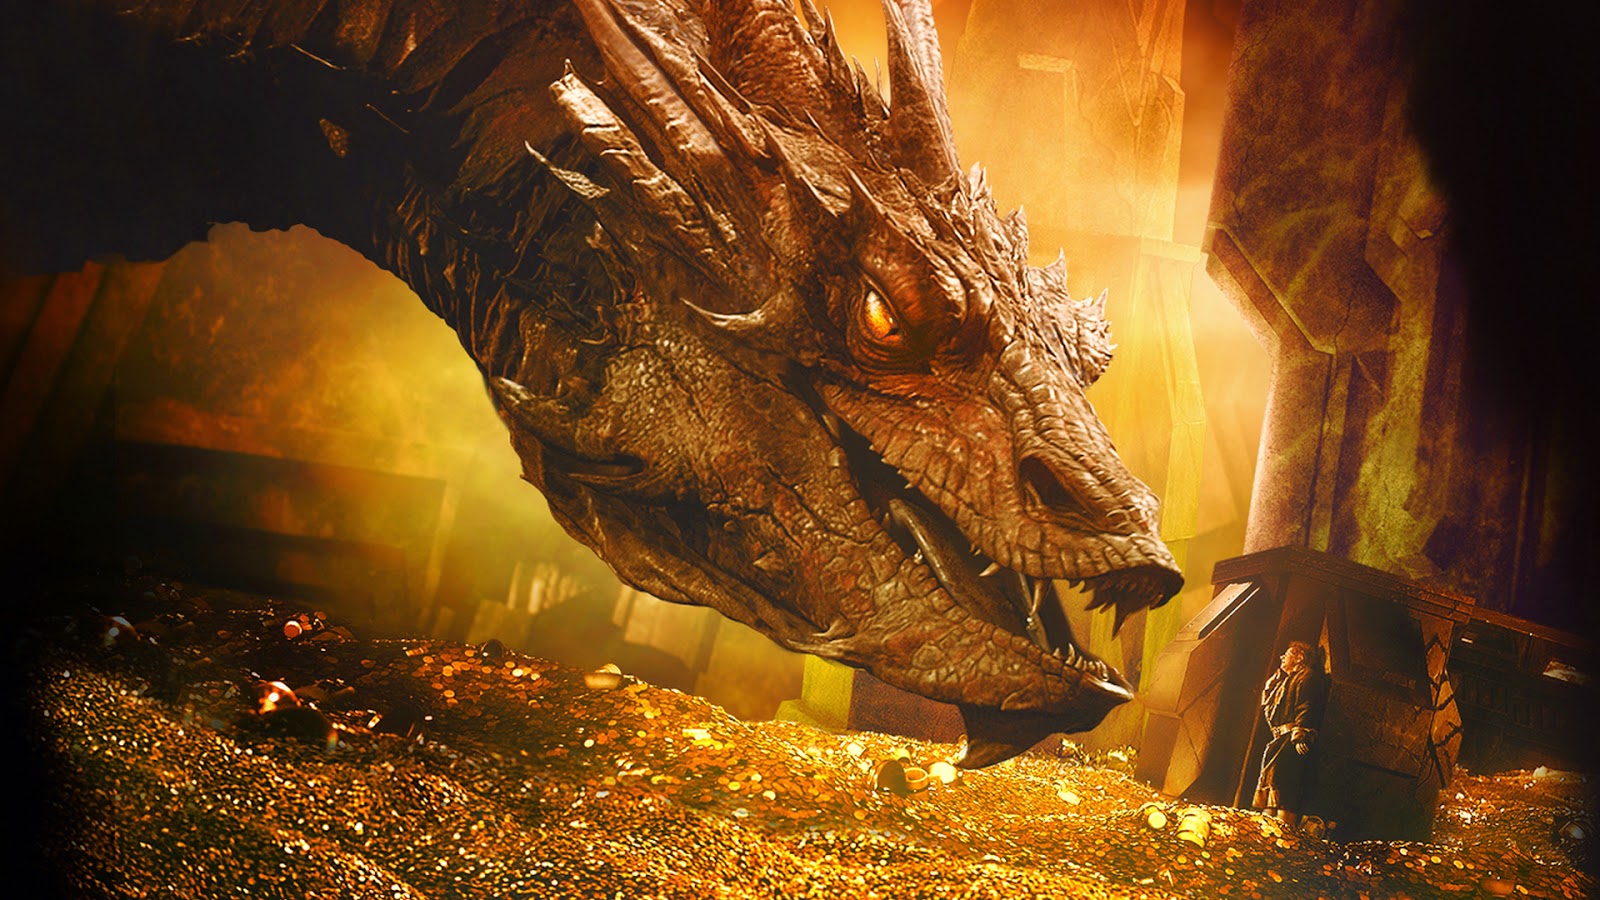 the_hobbit_the_desolation_of_smaug_1920x1080_by_sachso74-d7sr1wl